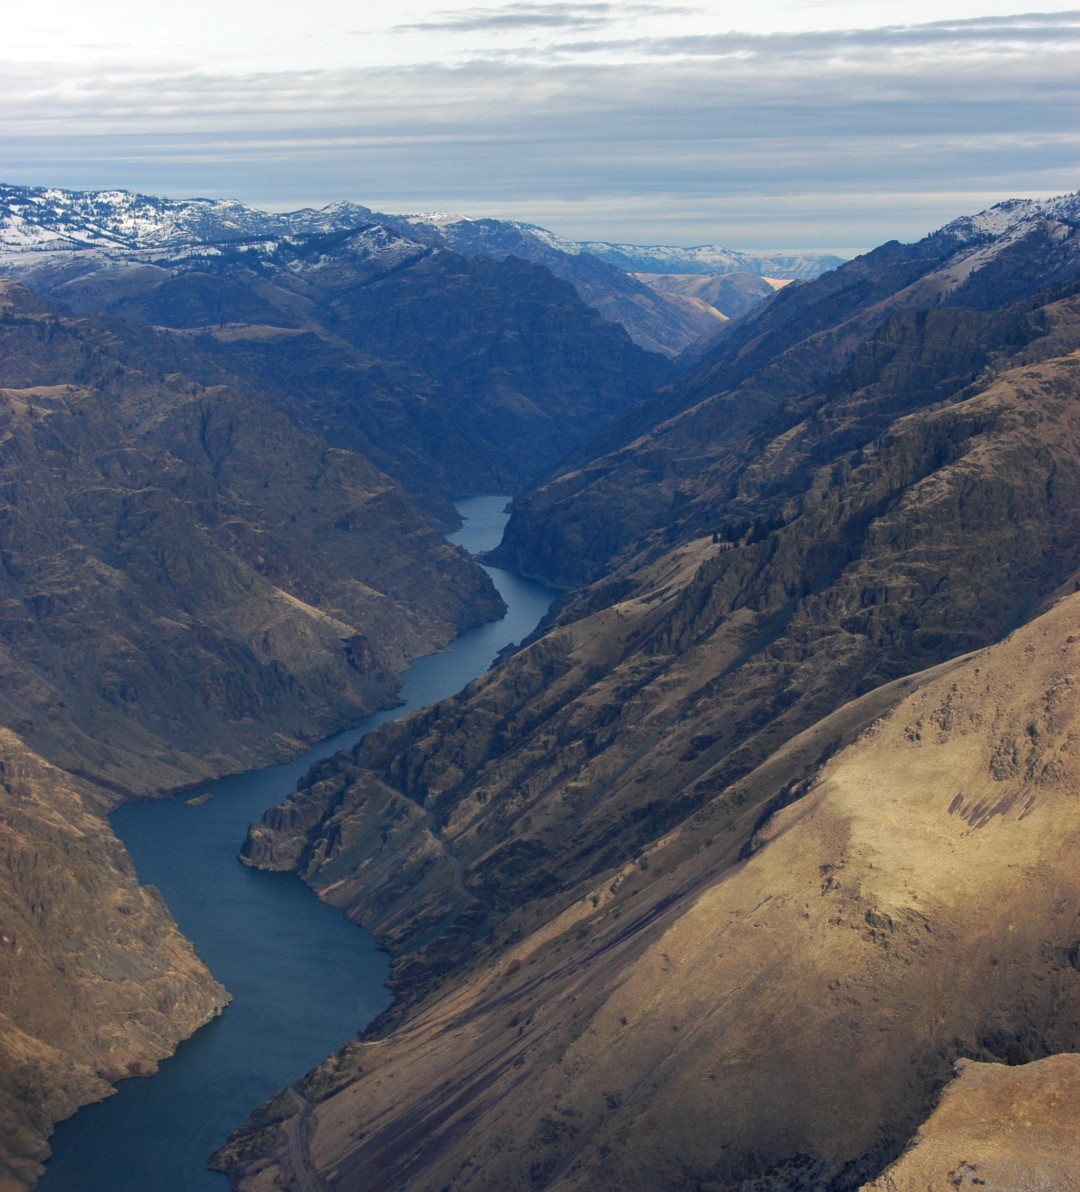 Several airstrips lie inside Hells Canyon, America’s deepest river gorge at 7,993 feet, when measured from the top of He Devil Peak to the water. Photo by Crista Worthy.